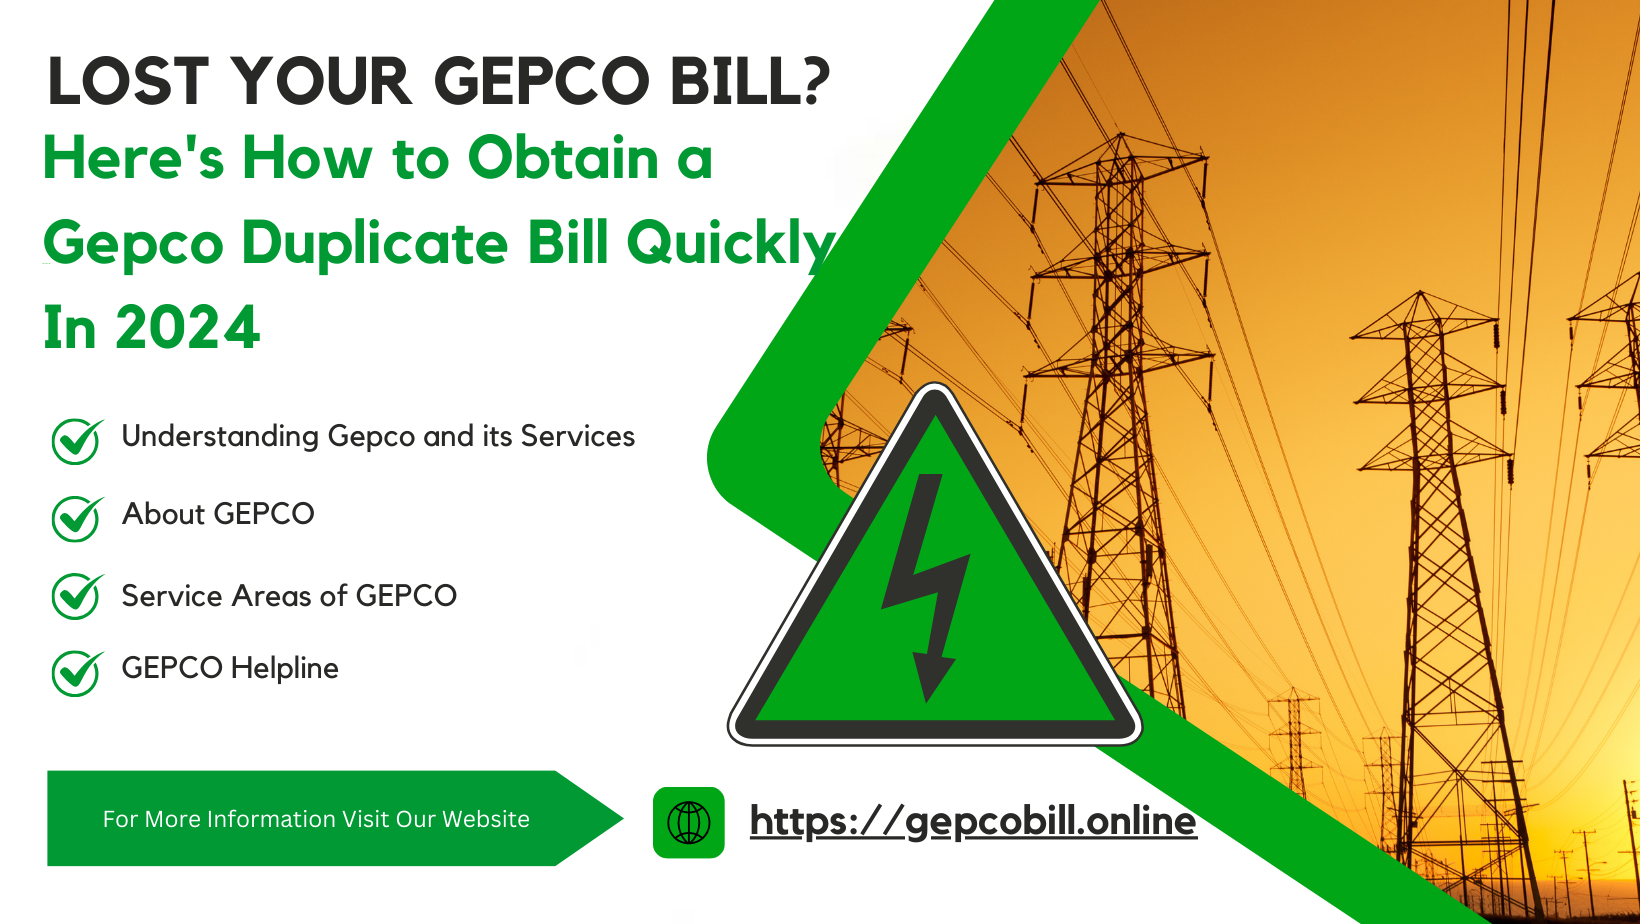 Lost Your Gepco Bill